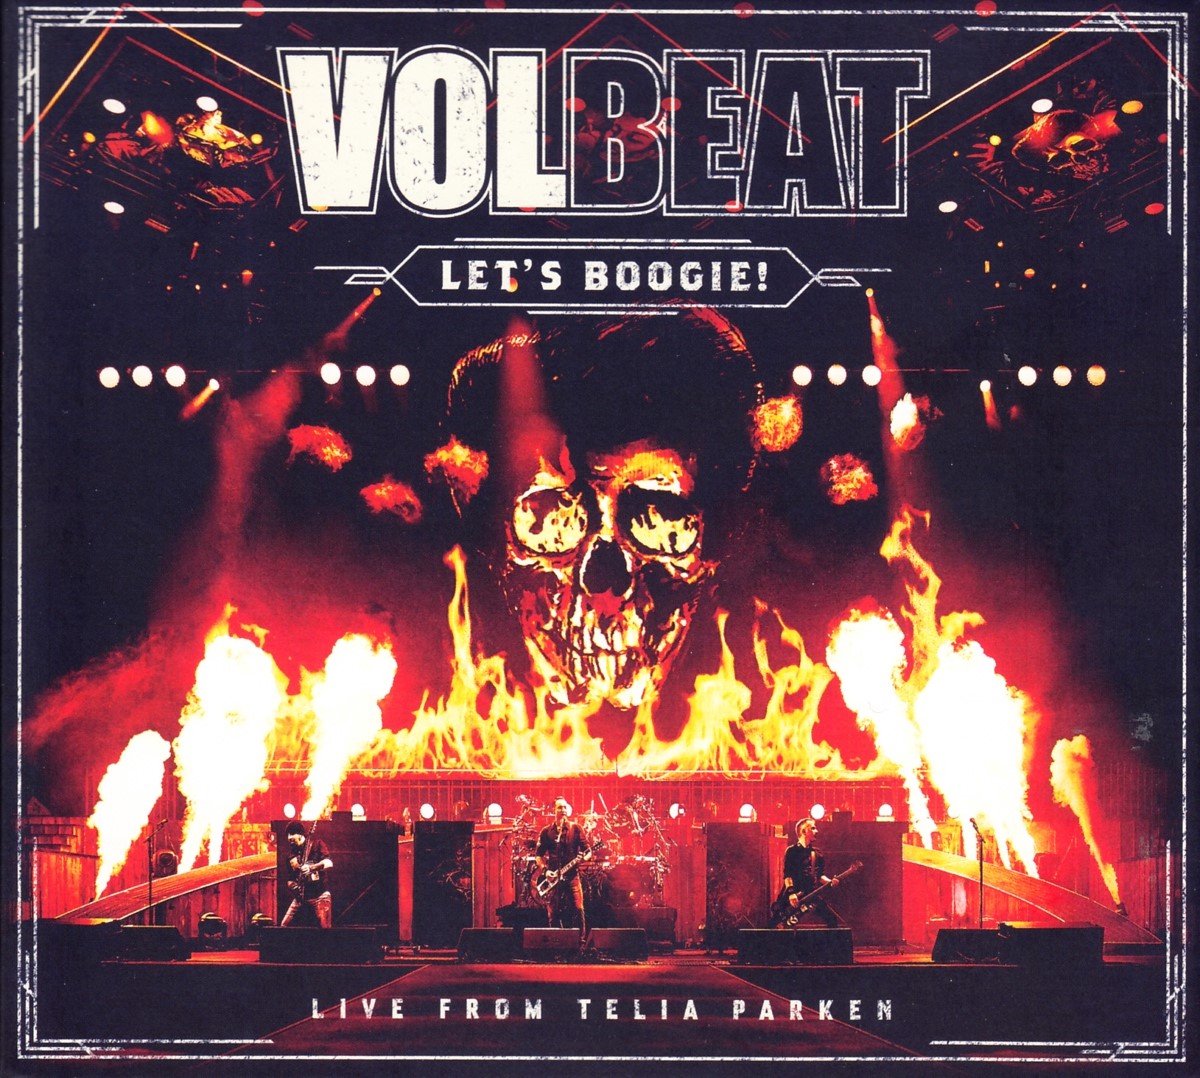 Volbeat - Let's Boogie (Live From Telia Parken) (2 CD) (Limited Edition) - Volbeat